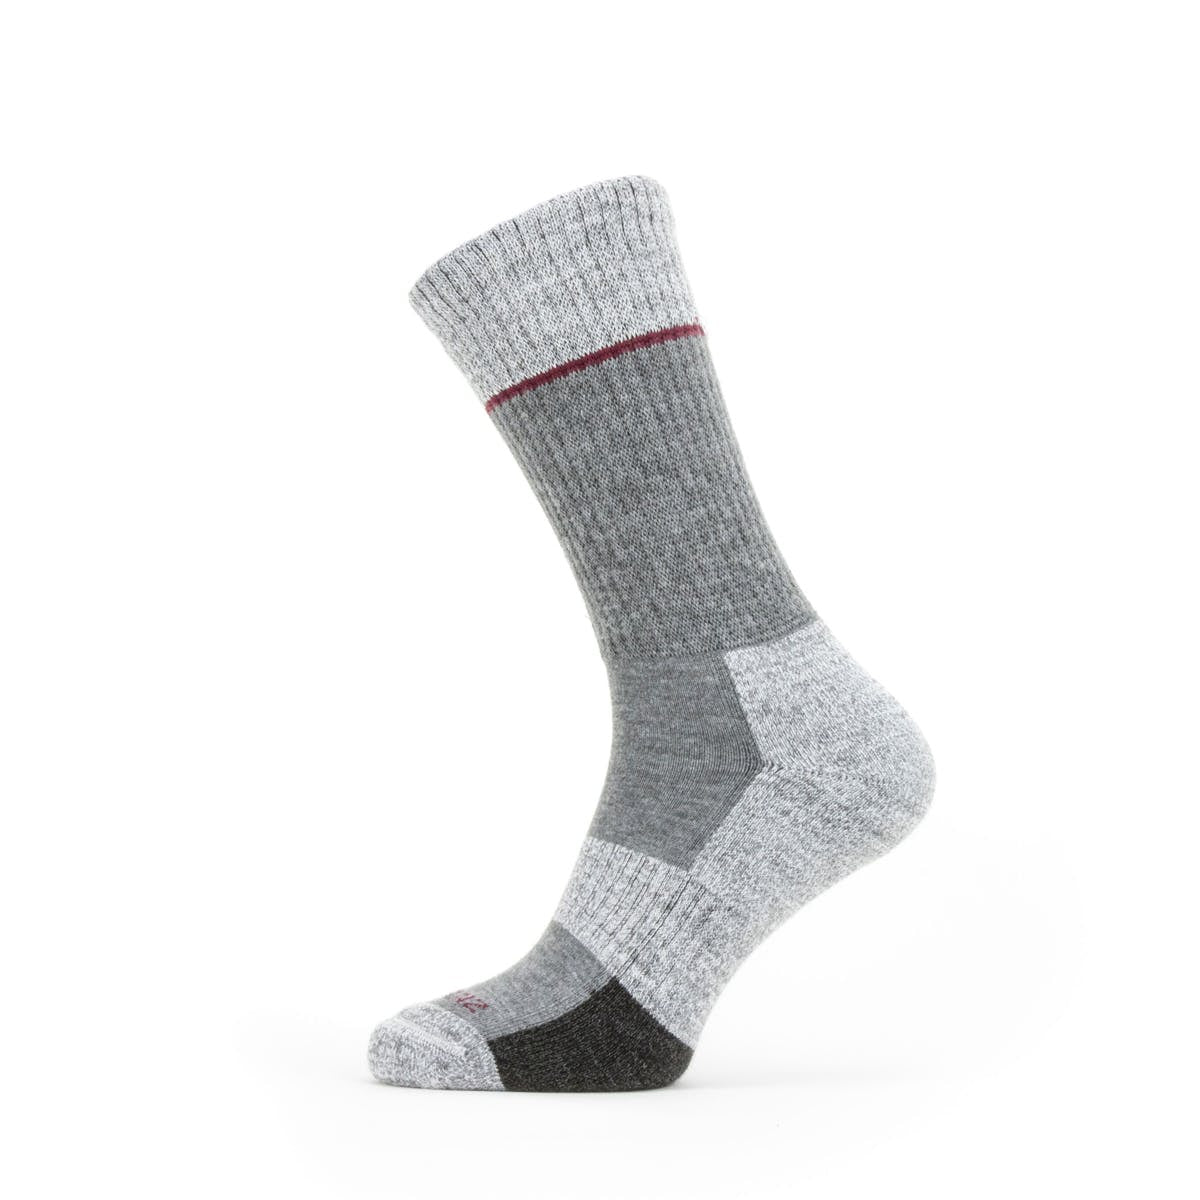 Solo Quick Dry Mid Calf Grey/Black/Red